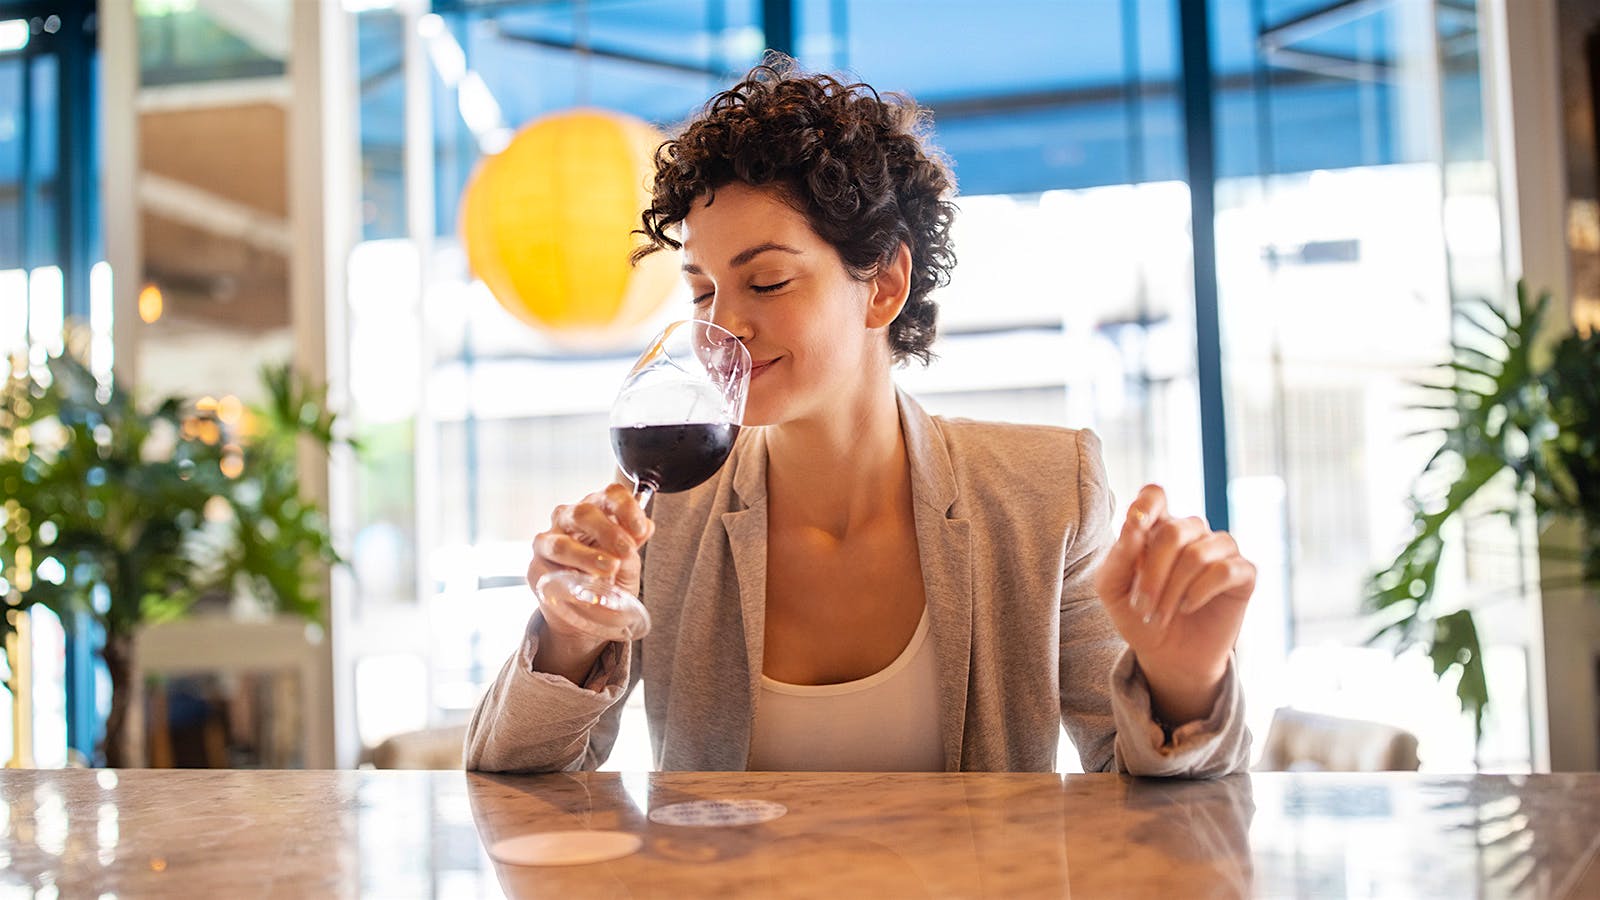 New Study Suggests Red Wine Reduces COVID Infection Rates